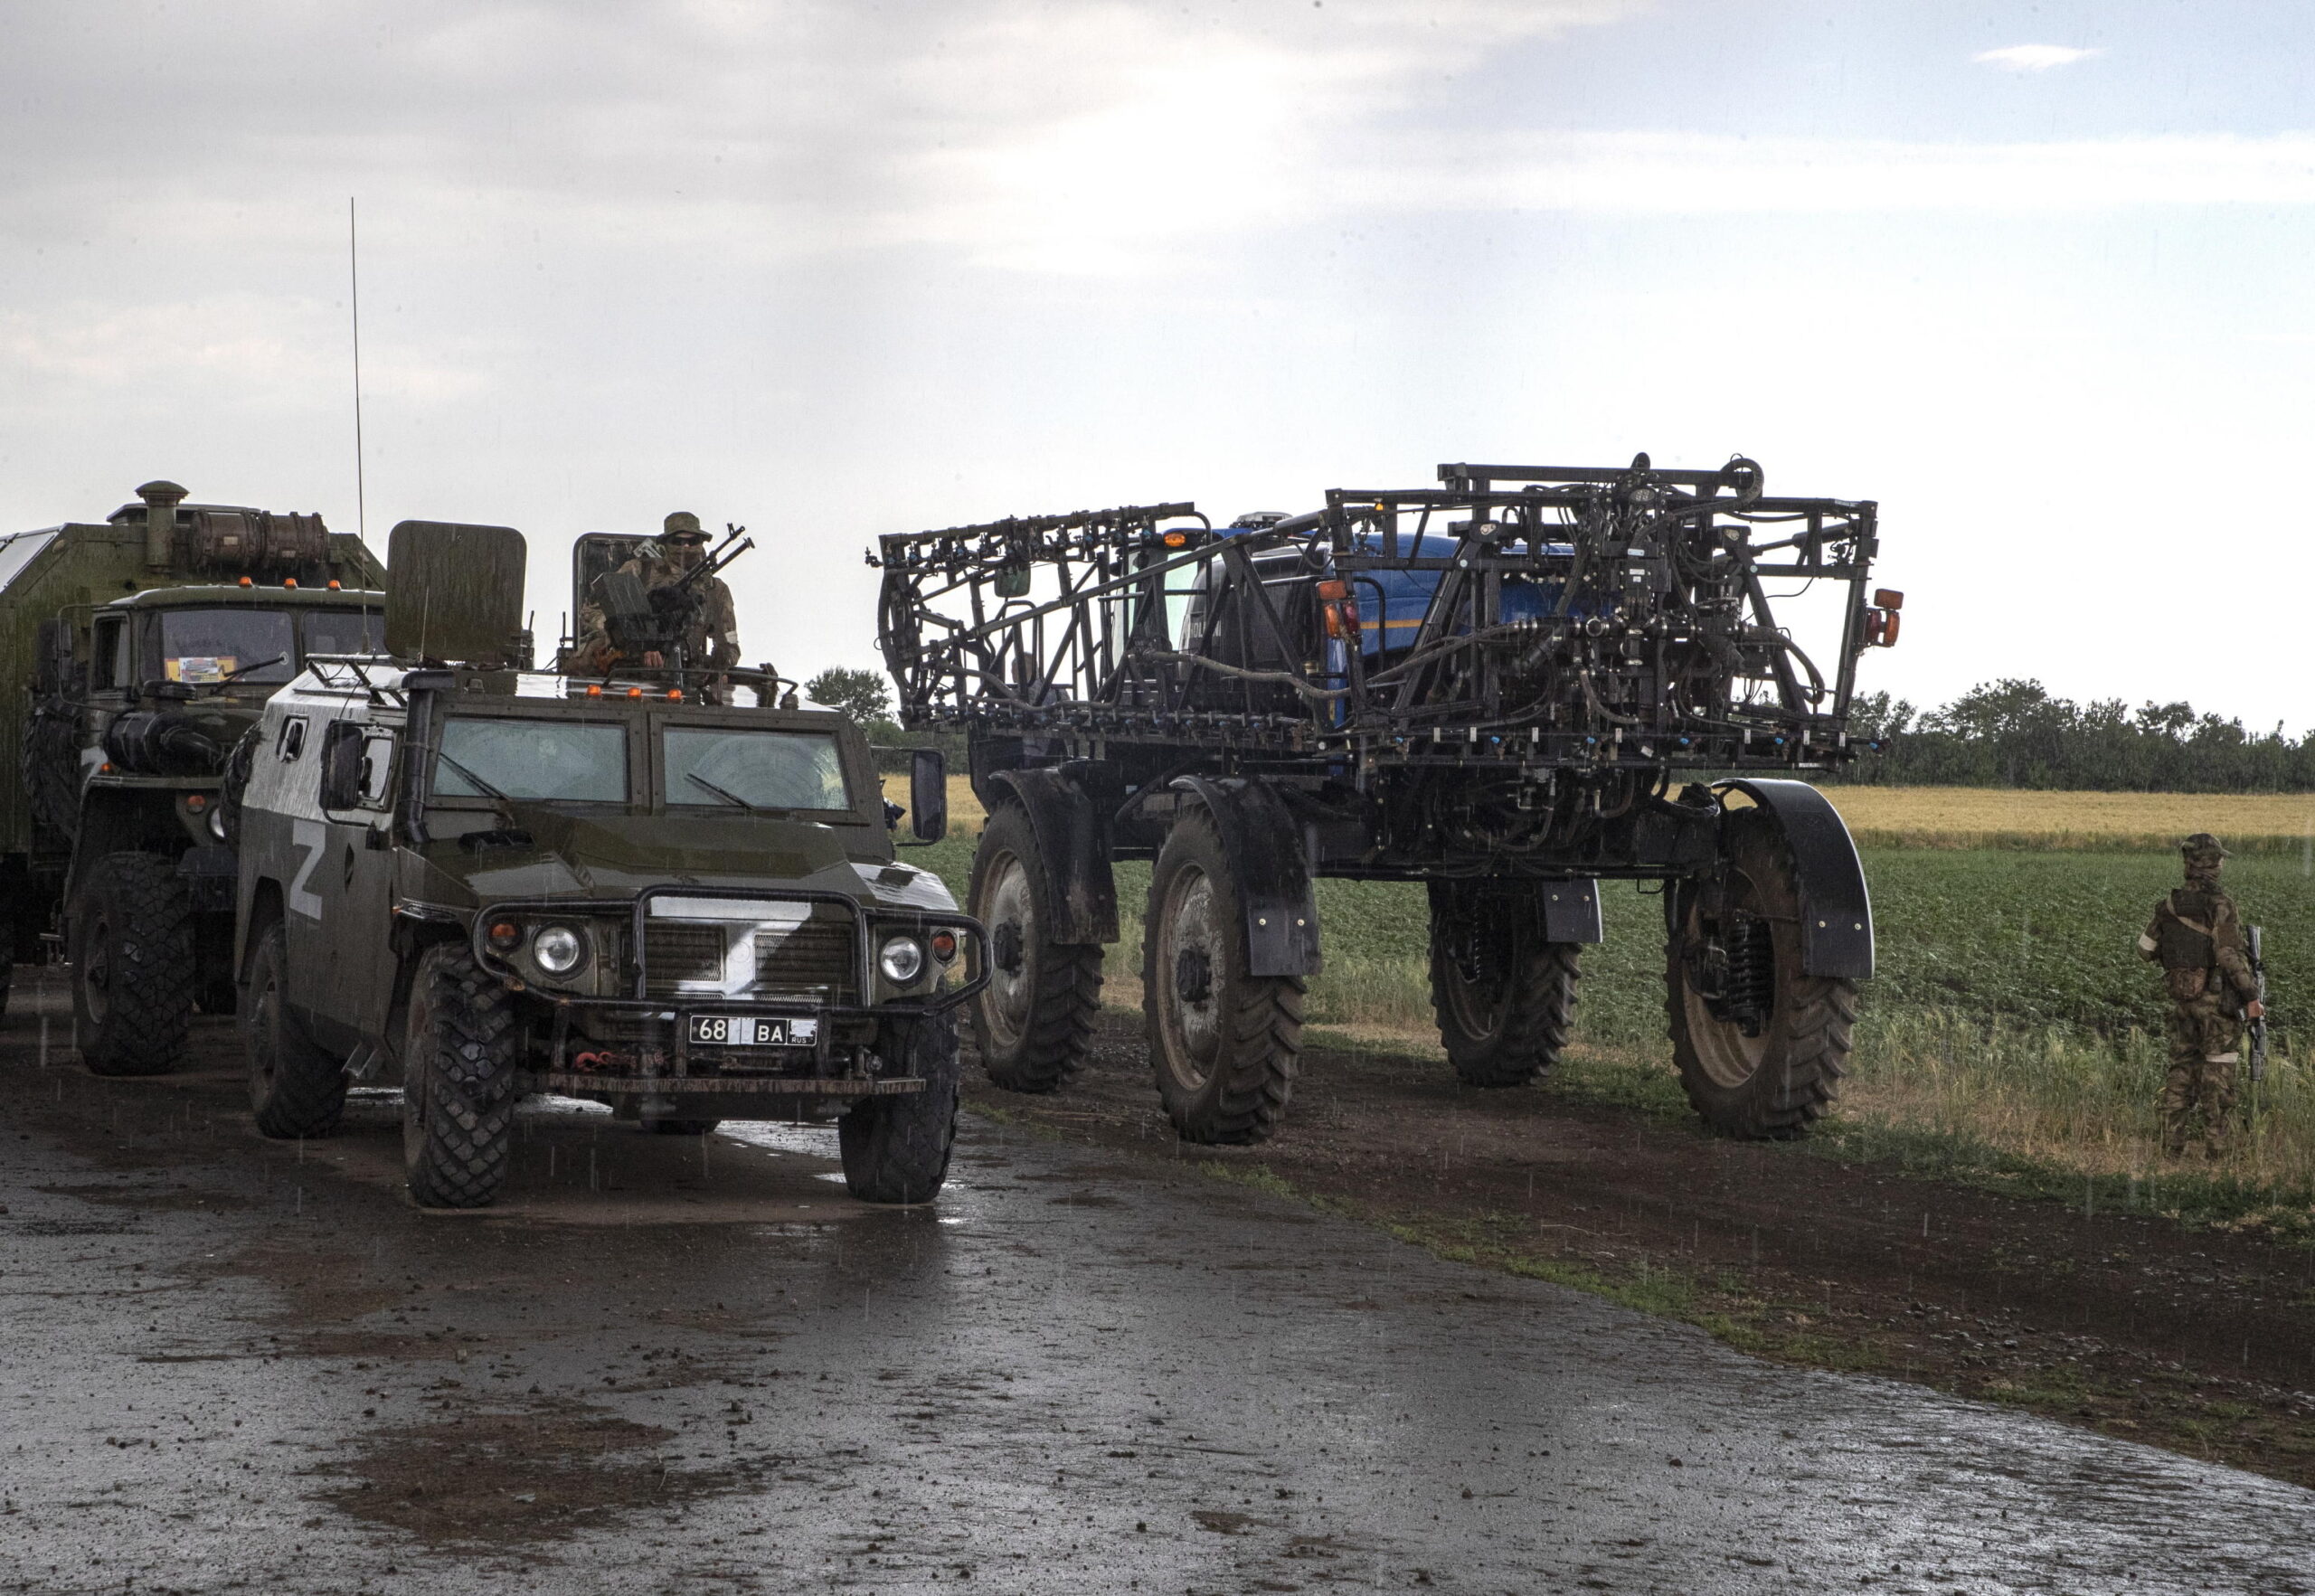 epa10013938 Russian servicemen and their vehicles seen near an agricultural tractor in front of a wheat field near Melitopol, Zaporizhia region, Ukraine, 14 June 2022 (Issued on 15 June 2022). The conflict in Ukraine has affected the availability and price of wheat worldwide. The Food and Agriculture Organization (FAO) of the United Nations said in its 10 June note assessing the risks emanating from the conflict in Ukraine that 'the current war raises concerns over whether crops will be harvested. It has already led to the closures of ports and oilseed crushing operations, affecting products intended for the export markets'. These are taking a toll on the country's exports of grains and vegetable oils. The city of Melitopol is located on the territory controlled by the troops of the Russian Federation and the city is administered by the Military-Civilian Administration controlled by Russia. On 24 February 2022 Russian troops entered the Ukrainian territory in what the Russian president declared a 'Special Military Operation', starting an armed conflict that has provoked destruction and a humanitarian crisis.  EPA/SERGEI ILNITSKY